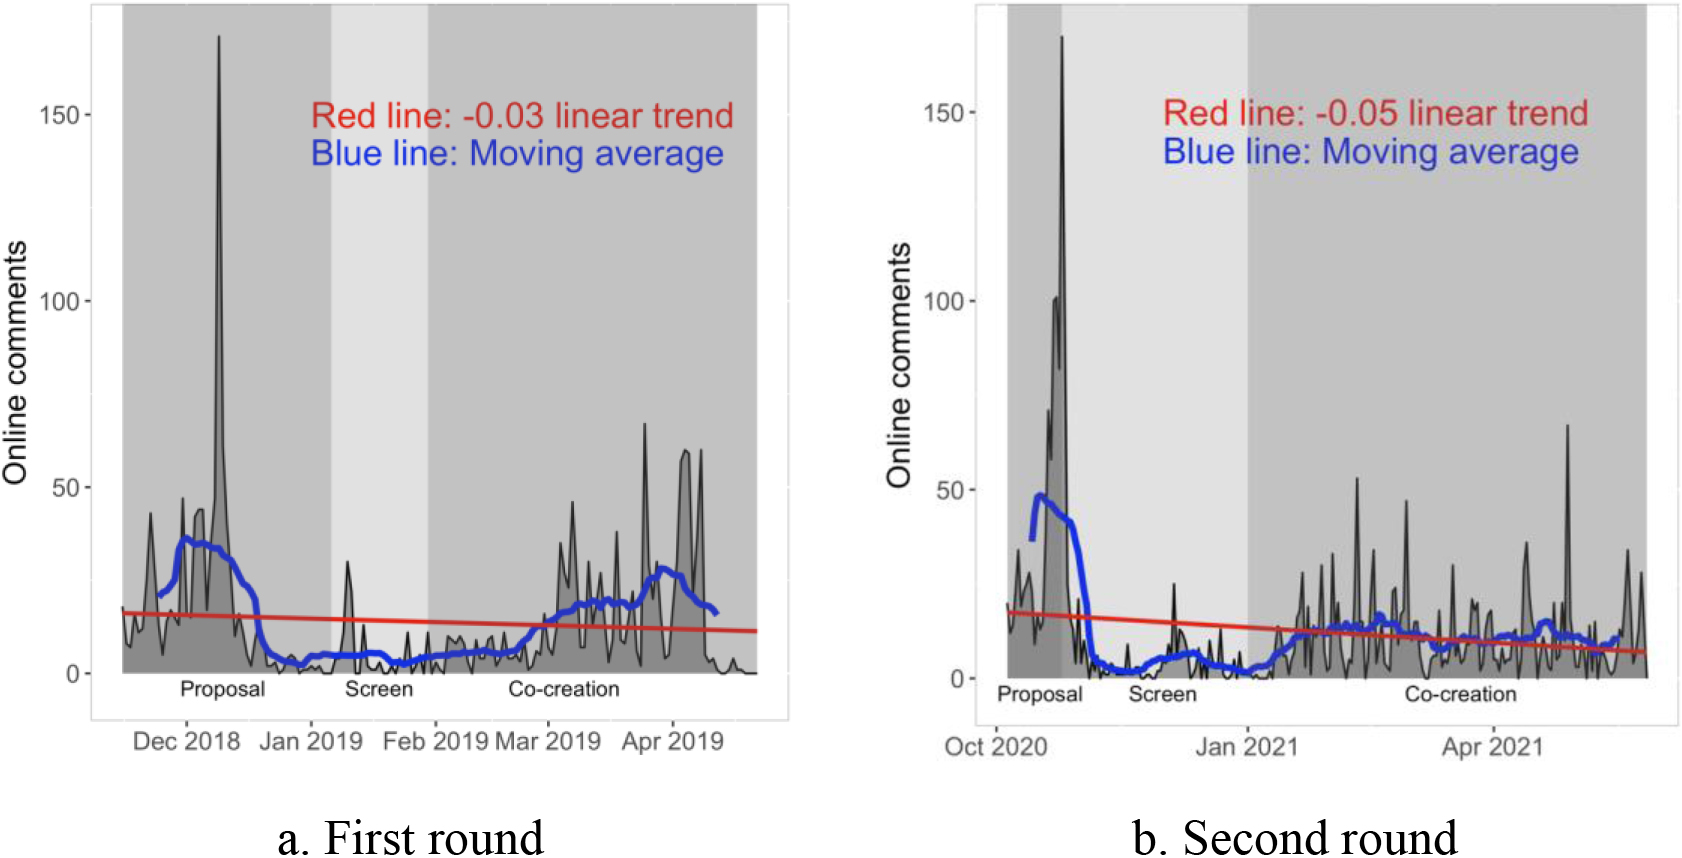 Activeness. Note: The grey line shows the number of daily engagements in online discussions. The red line shows the linear trend; the blue line shows the moving average. The shaded areas distinguish different stages: proposal, screen, and co-creation.